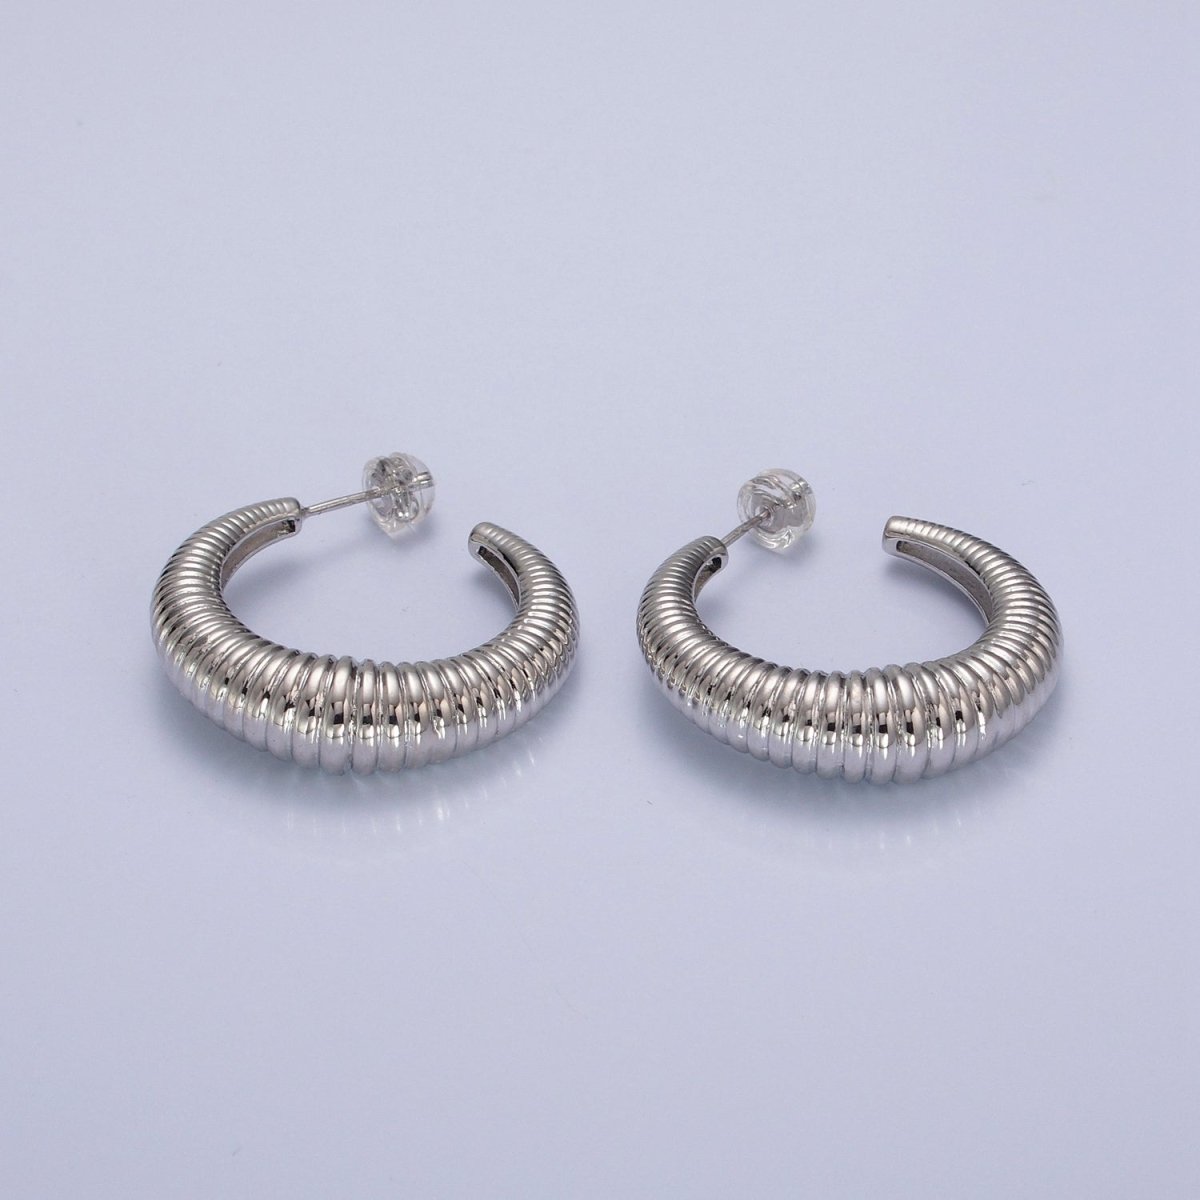 24K Gold Filled 30mm Croissant C-Shaped Hoop Earrings in Gold & Silver | P300 P301 - DLUXCA